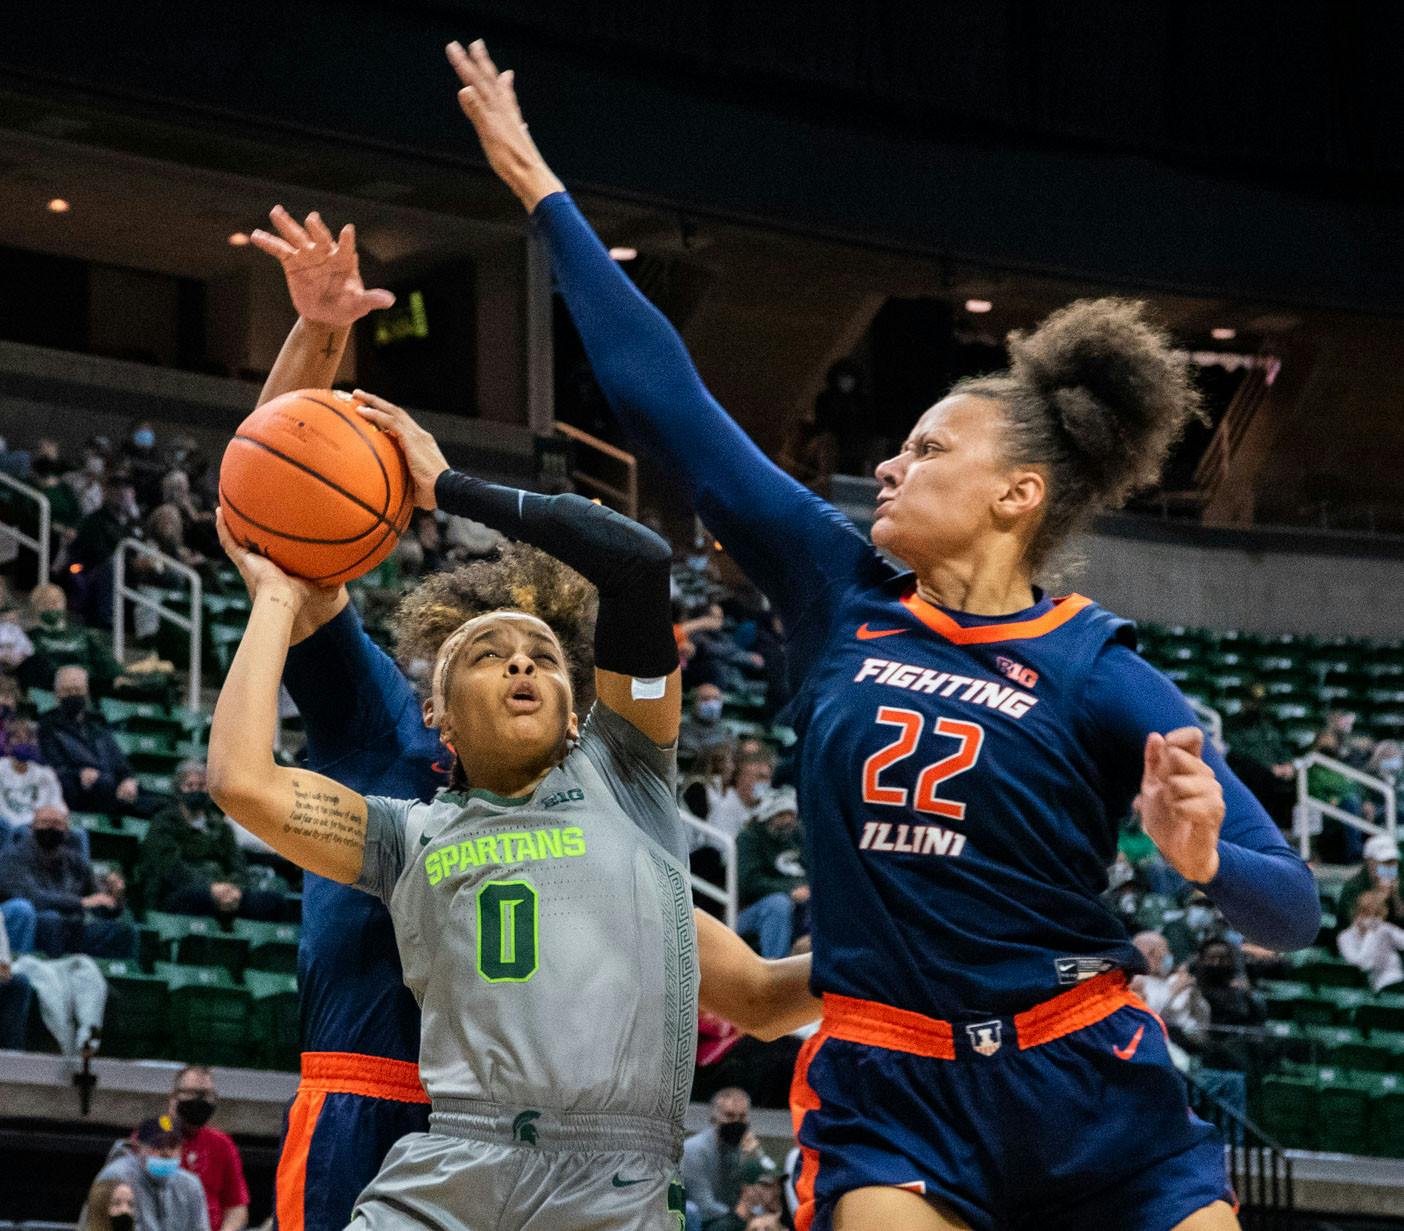 <p>Freshman guard Deedee Hagemann (0) avoids outstretched arms to score a basket in the first quarter. The Spartans beat the Fighting Illini, 75-60, in their Big Ten opener on Dec. 9, 2021. </p>